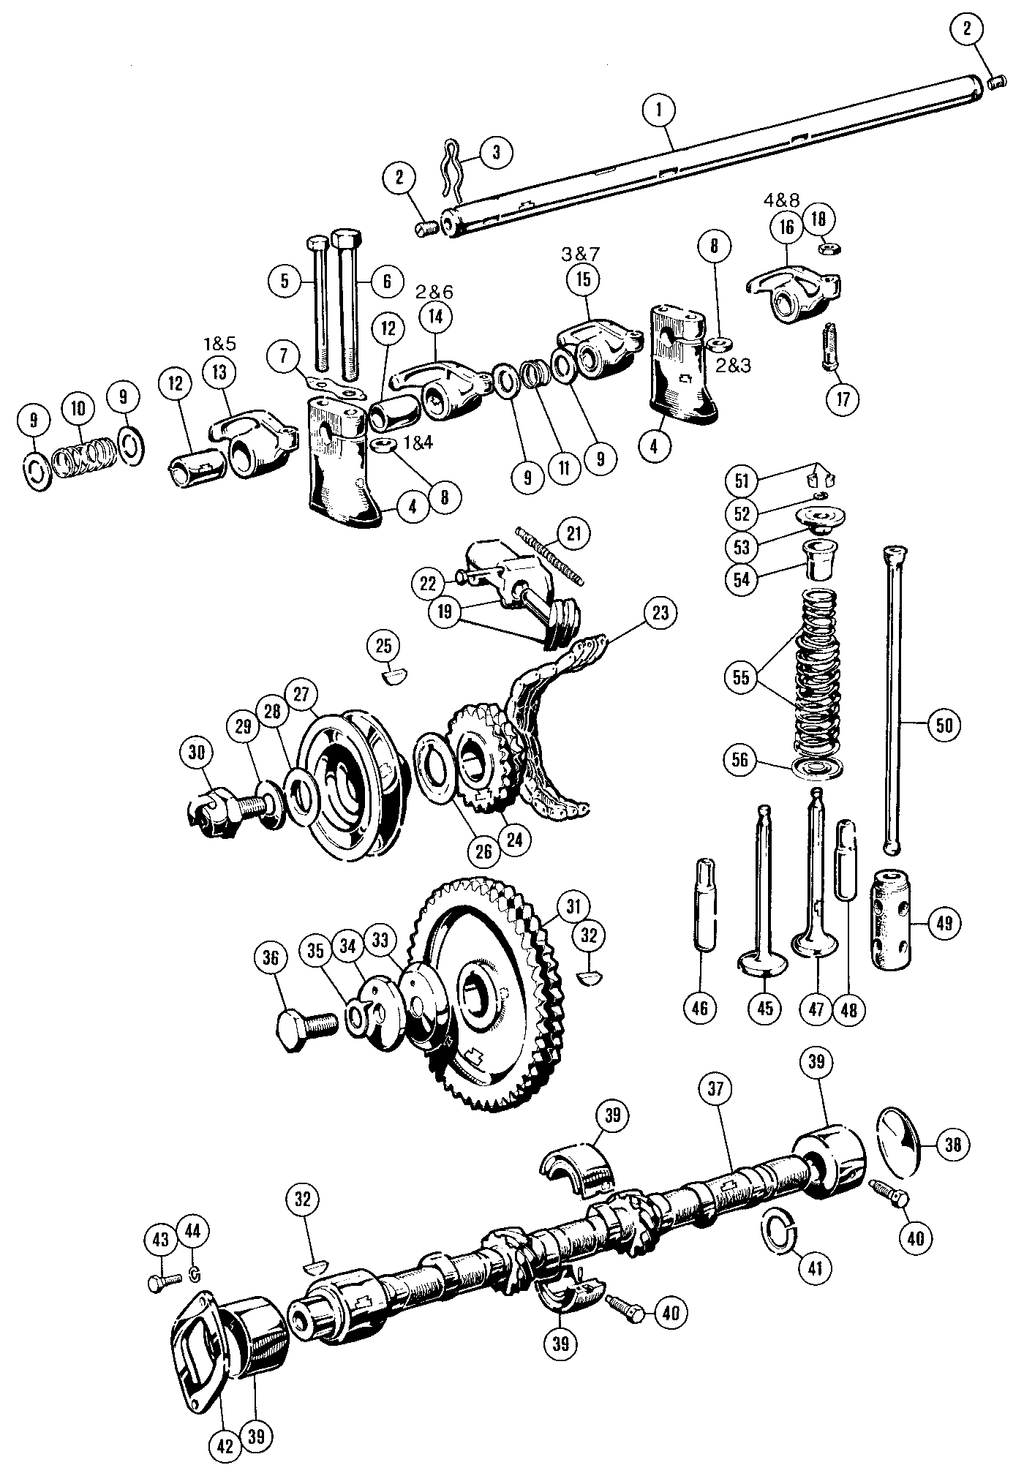 MGTD-TF 1949-1955 - Camshafts | Webshop Anglo Parts - 1